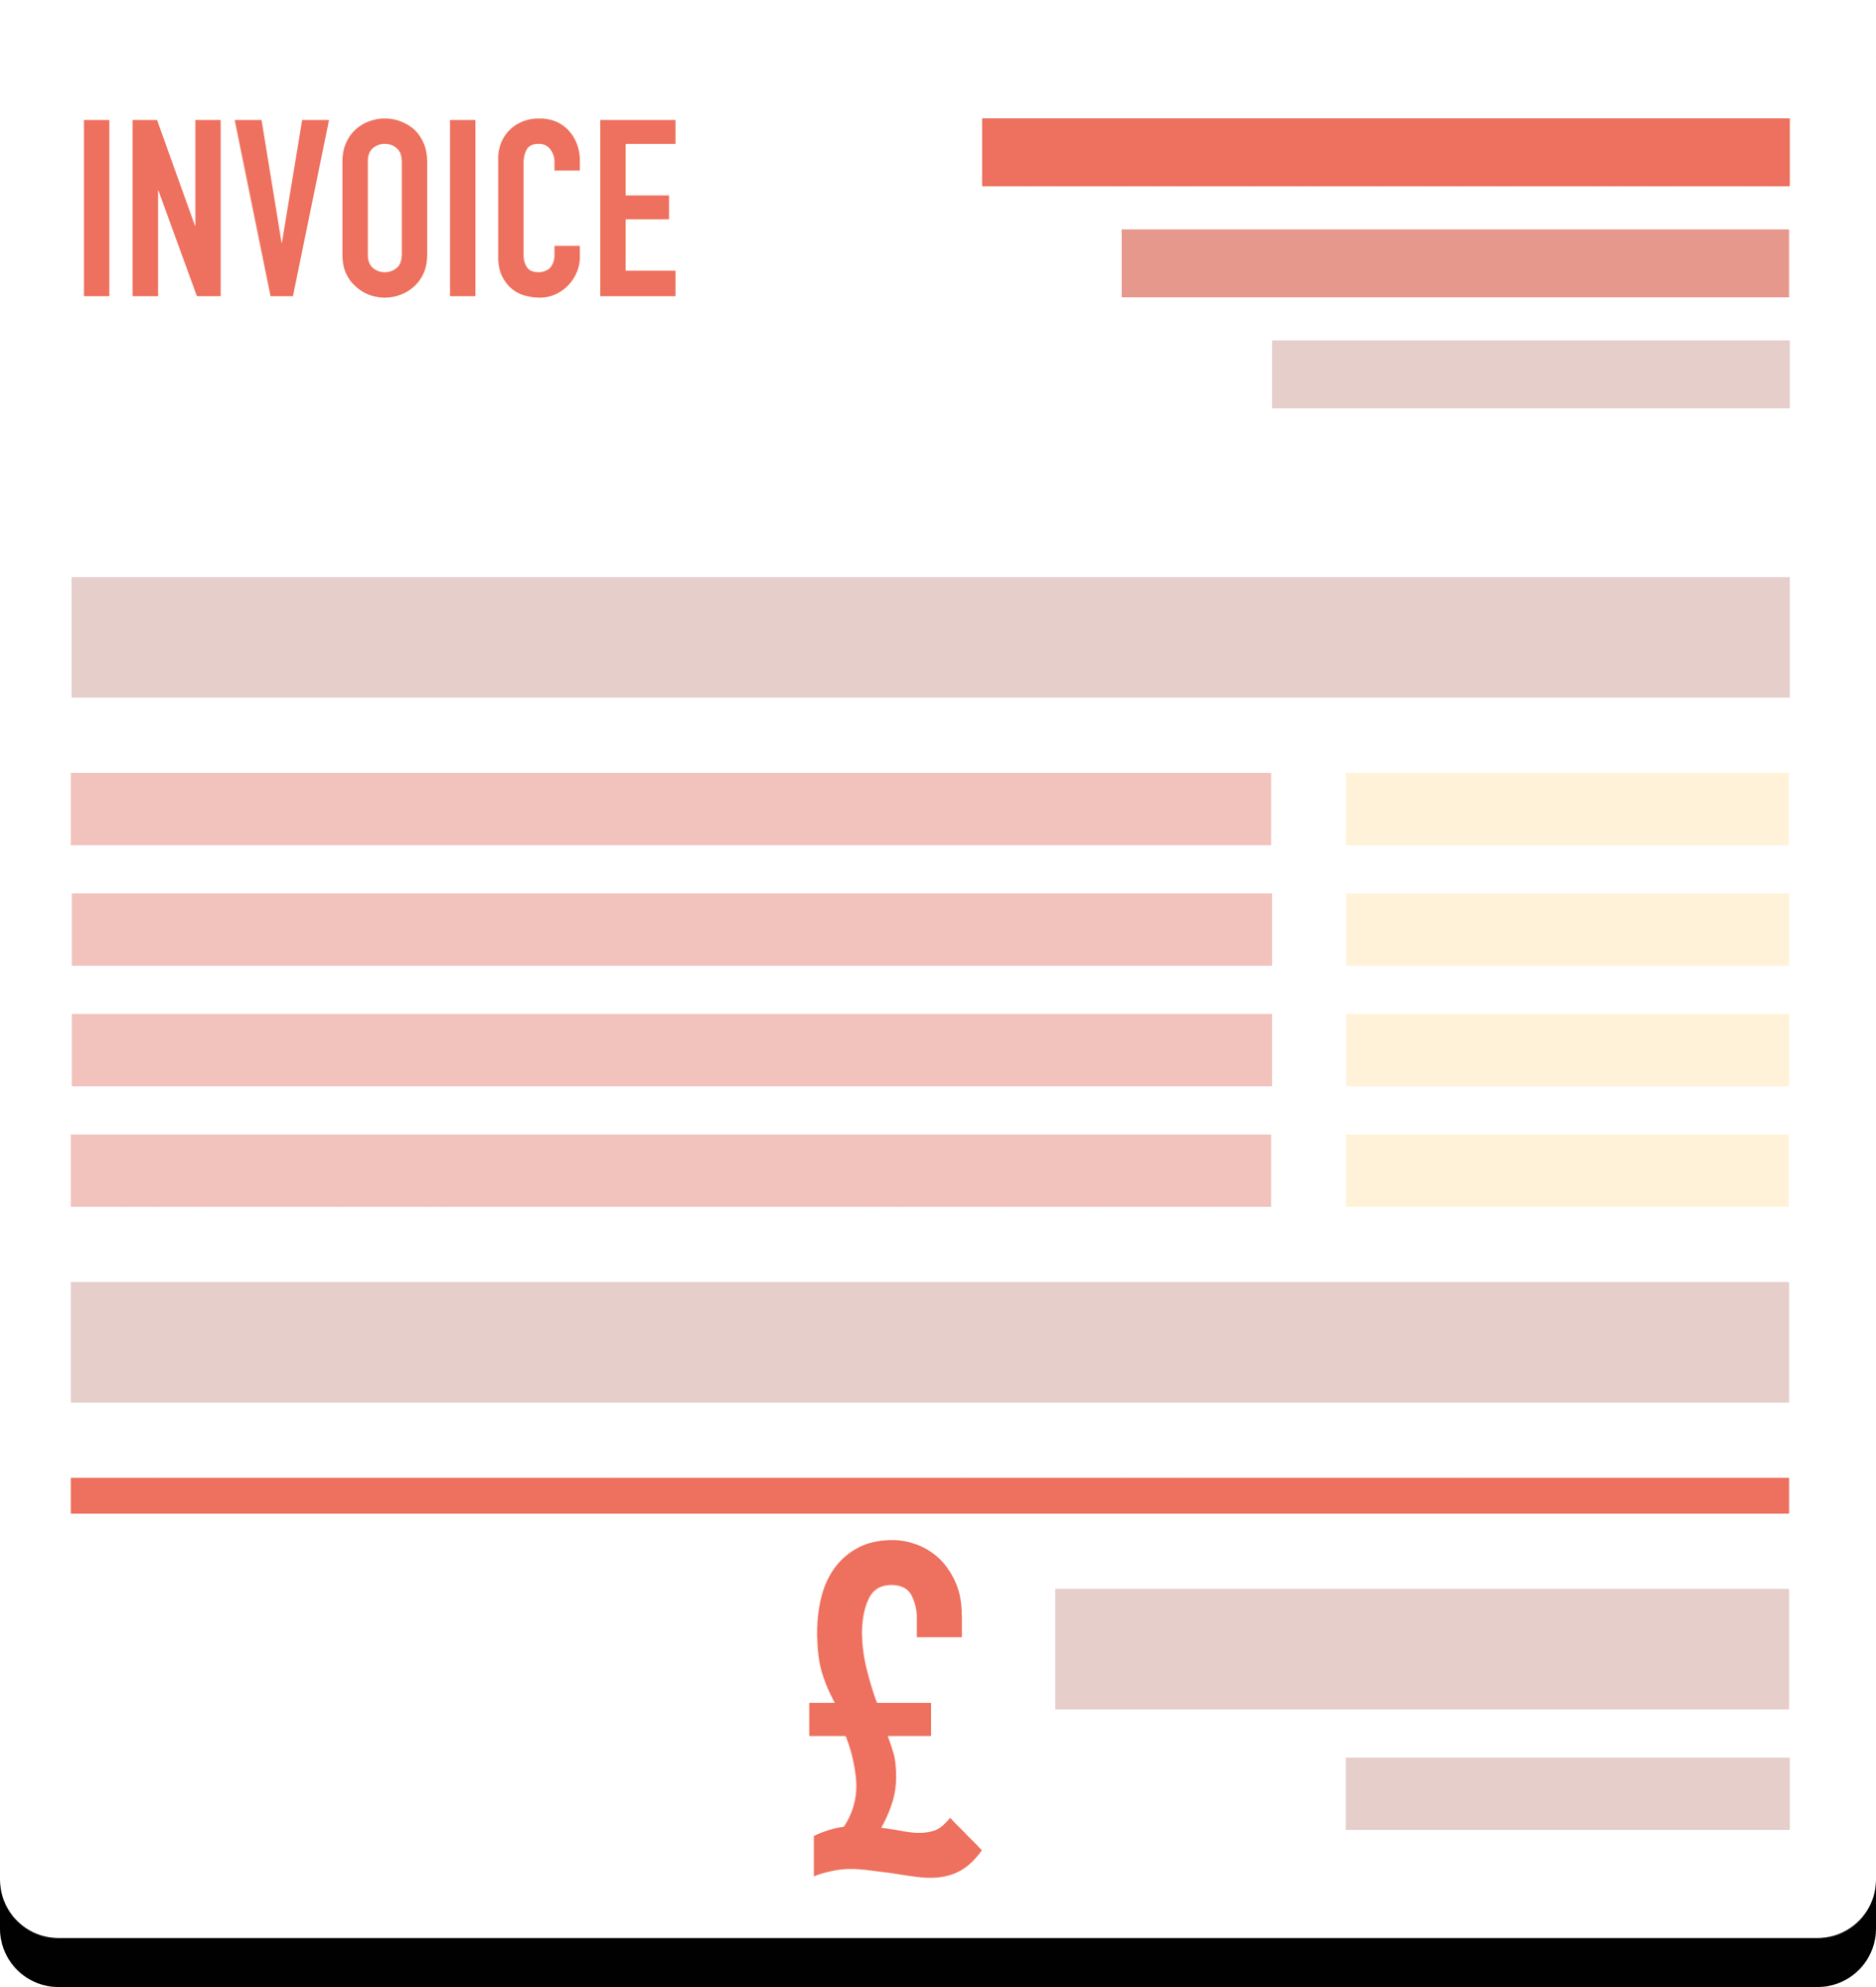 Invoice Template for Scrap and Demolition